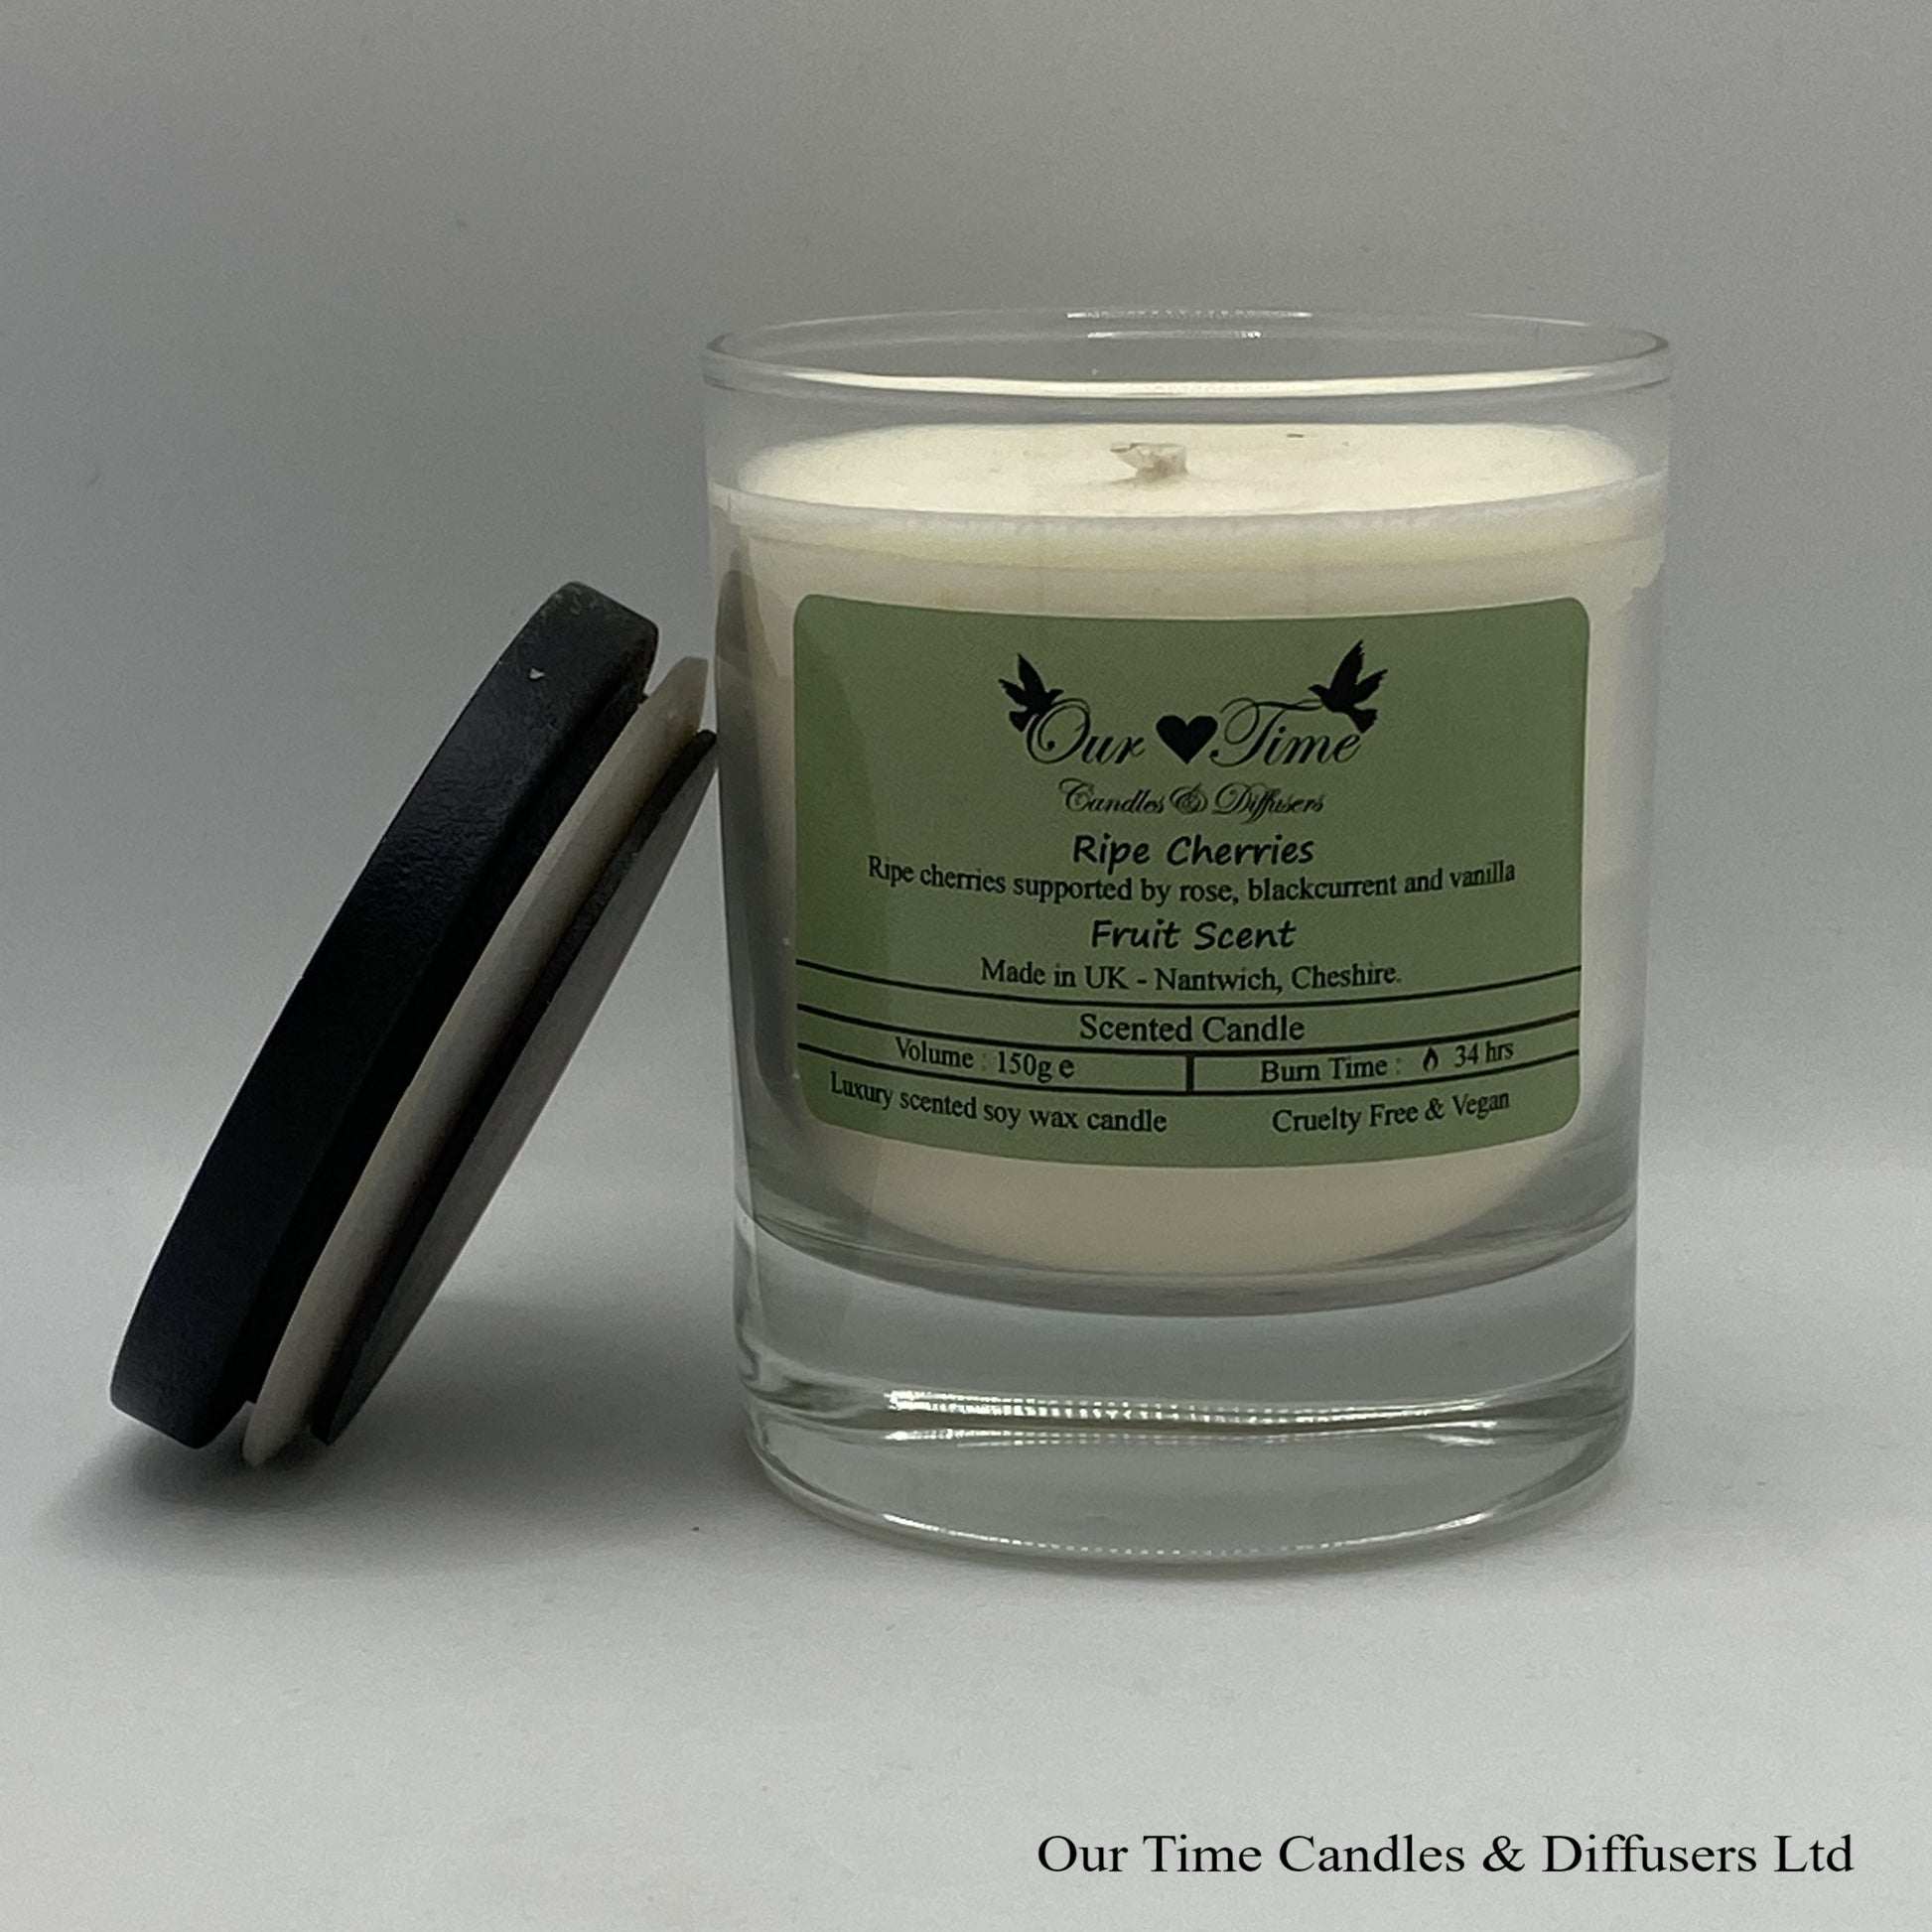 Medium Candle with black lid off